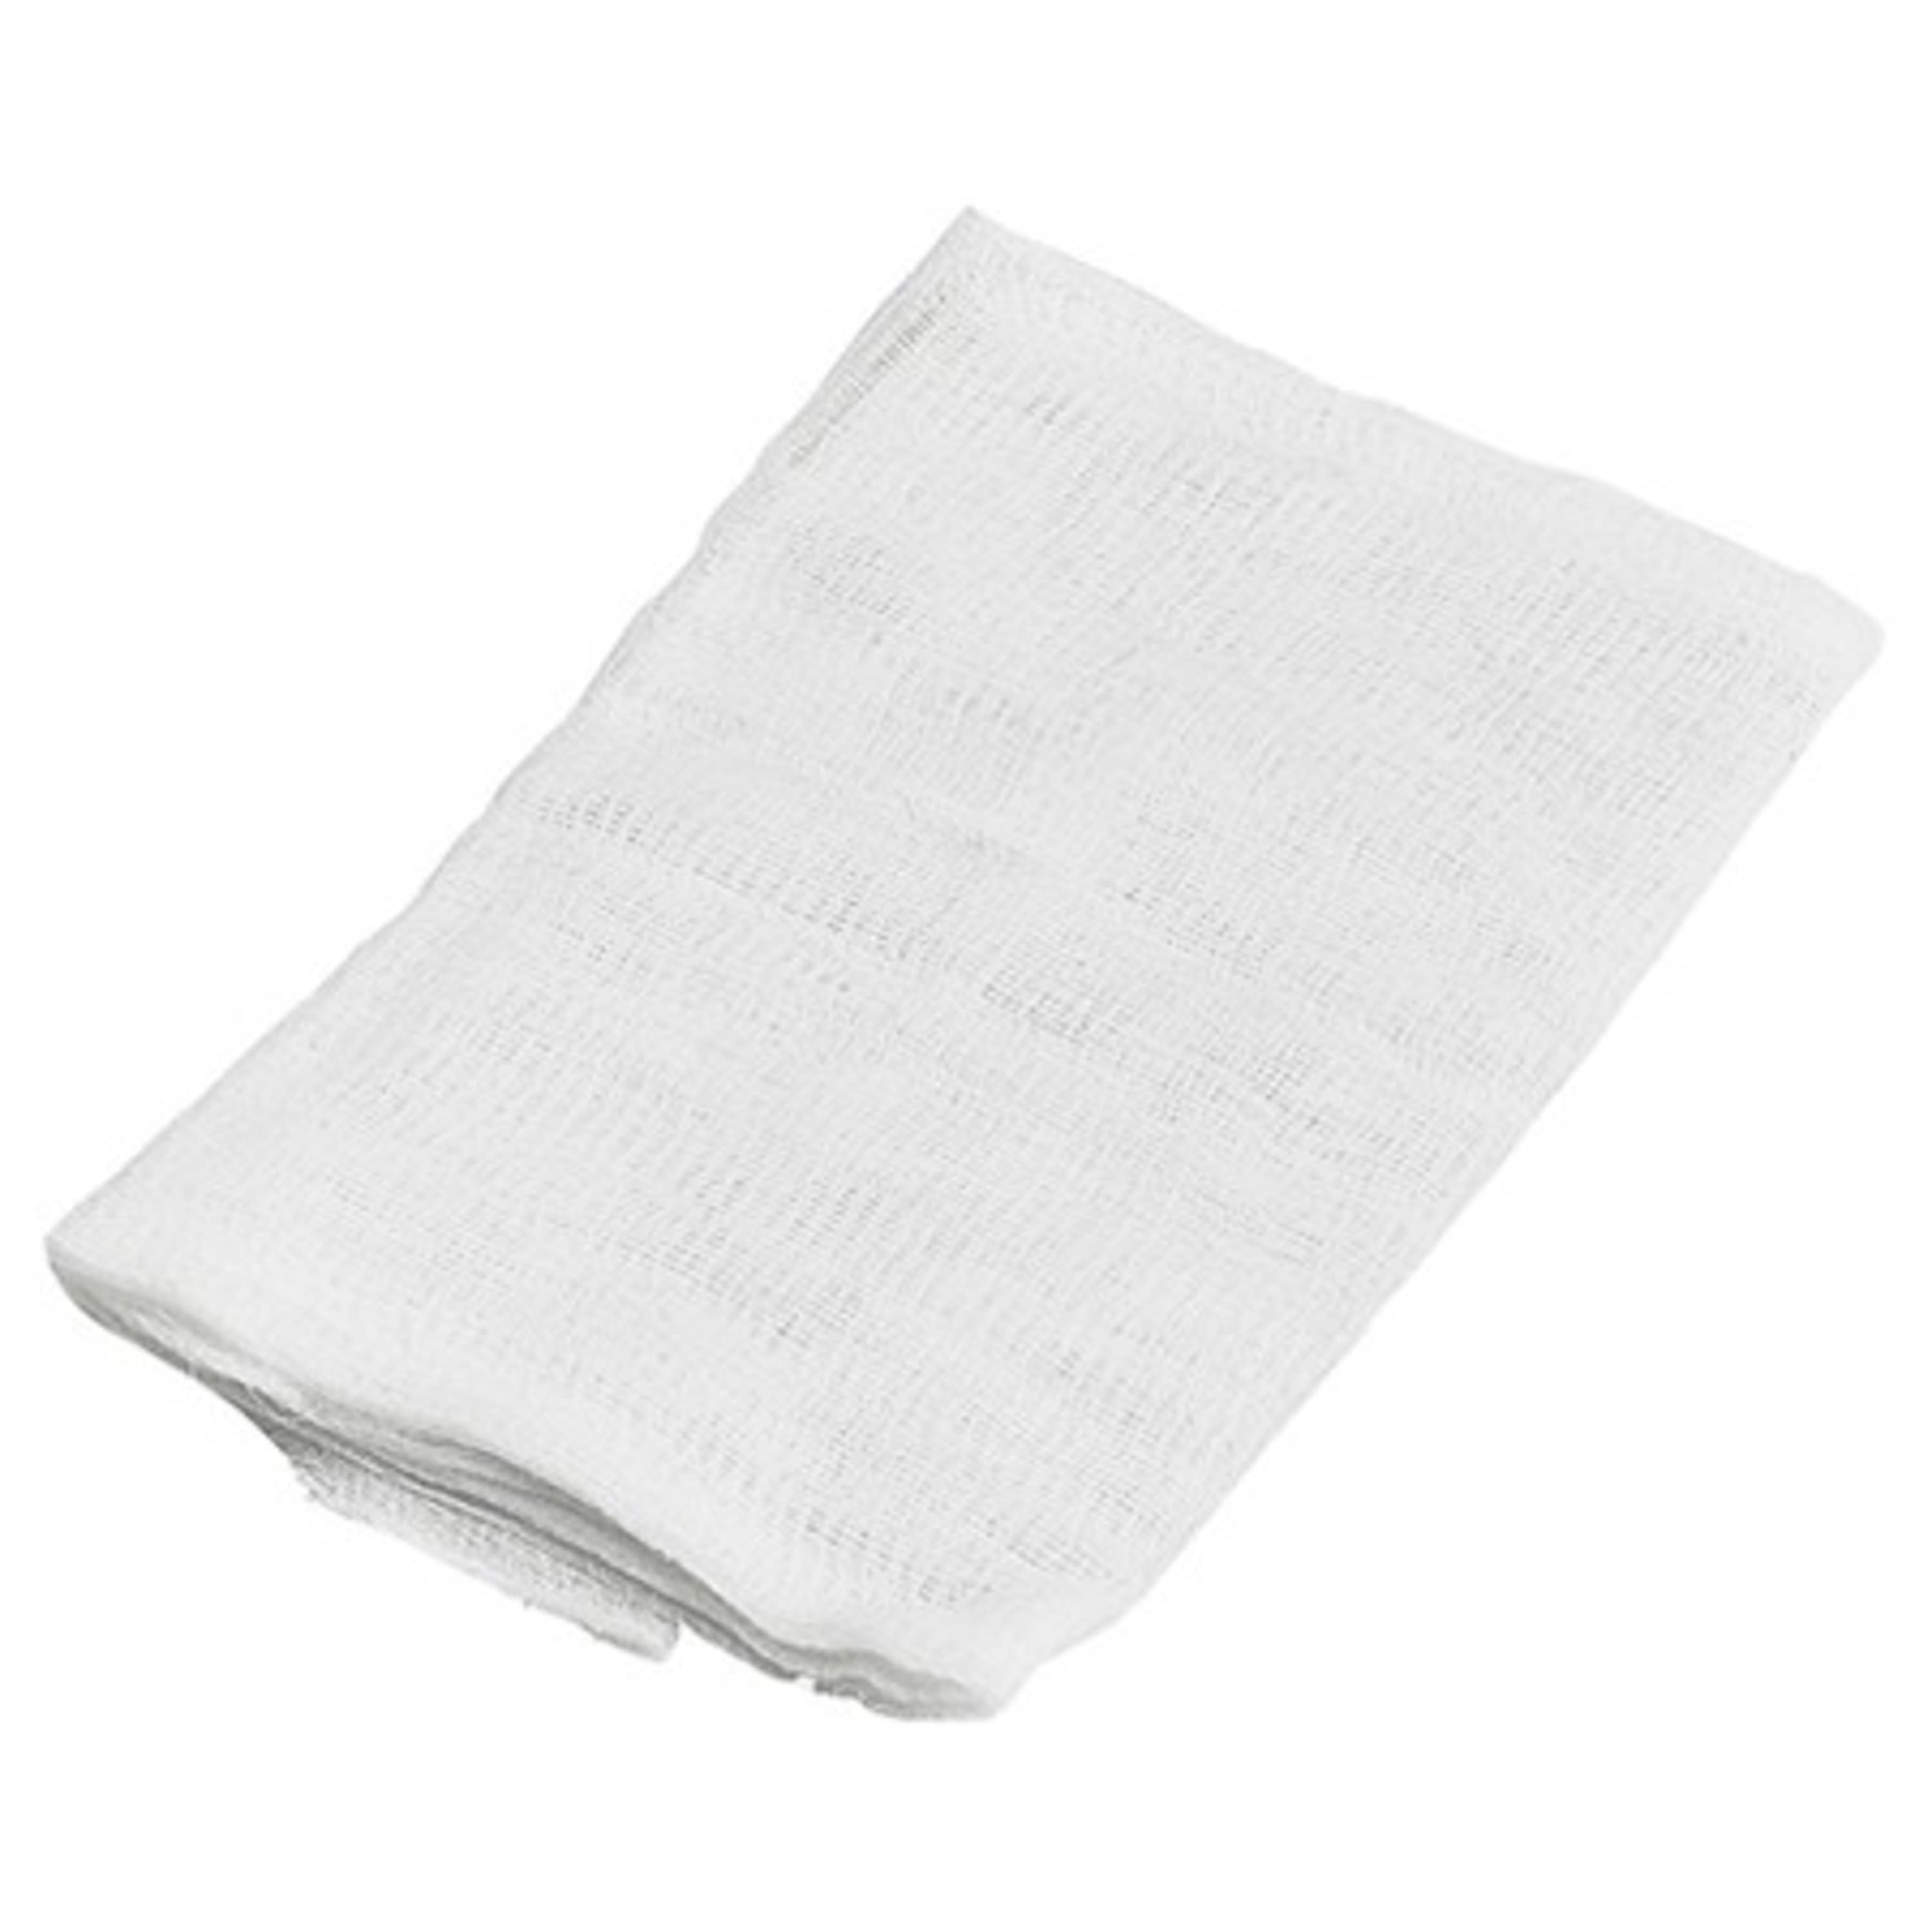 Mainstays Cotton Canning Cheese Cloth, 4 Square Yards